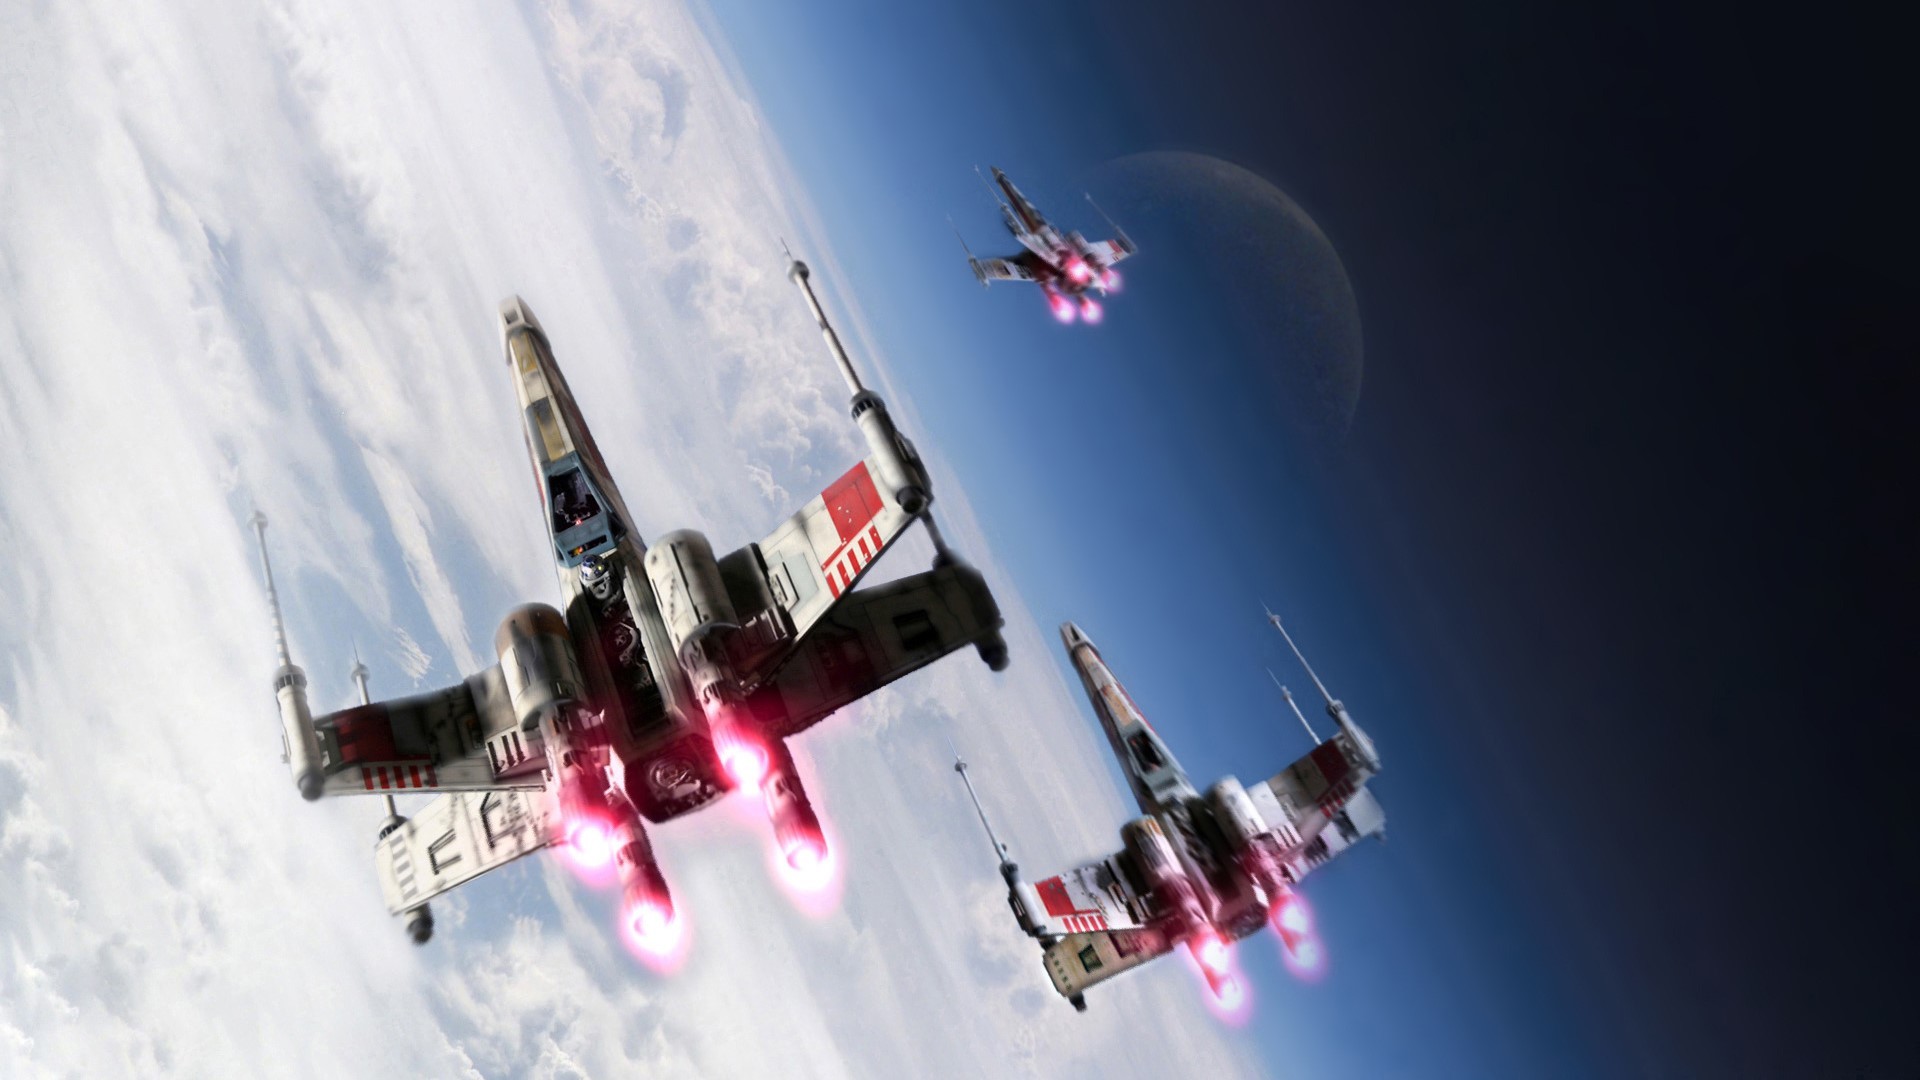 General 1920x1080 X-wing Star Wars Rebel Alliance Star Wars Ships science fiction vehicle Star Wars: Battlefront EA Games video games PC gaming